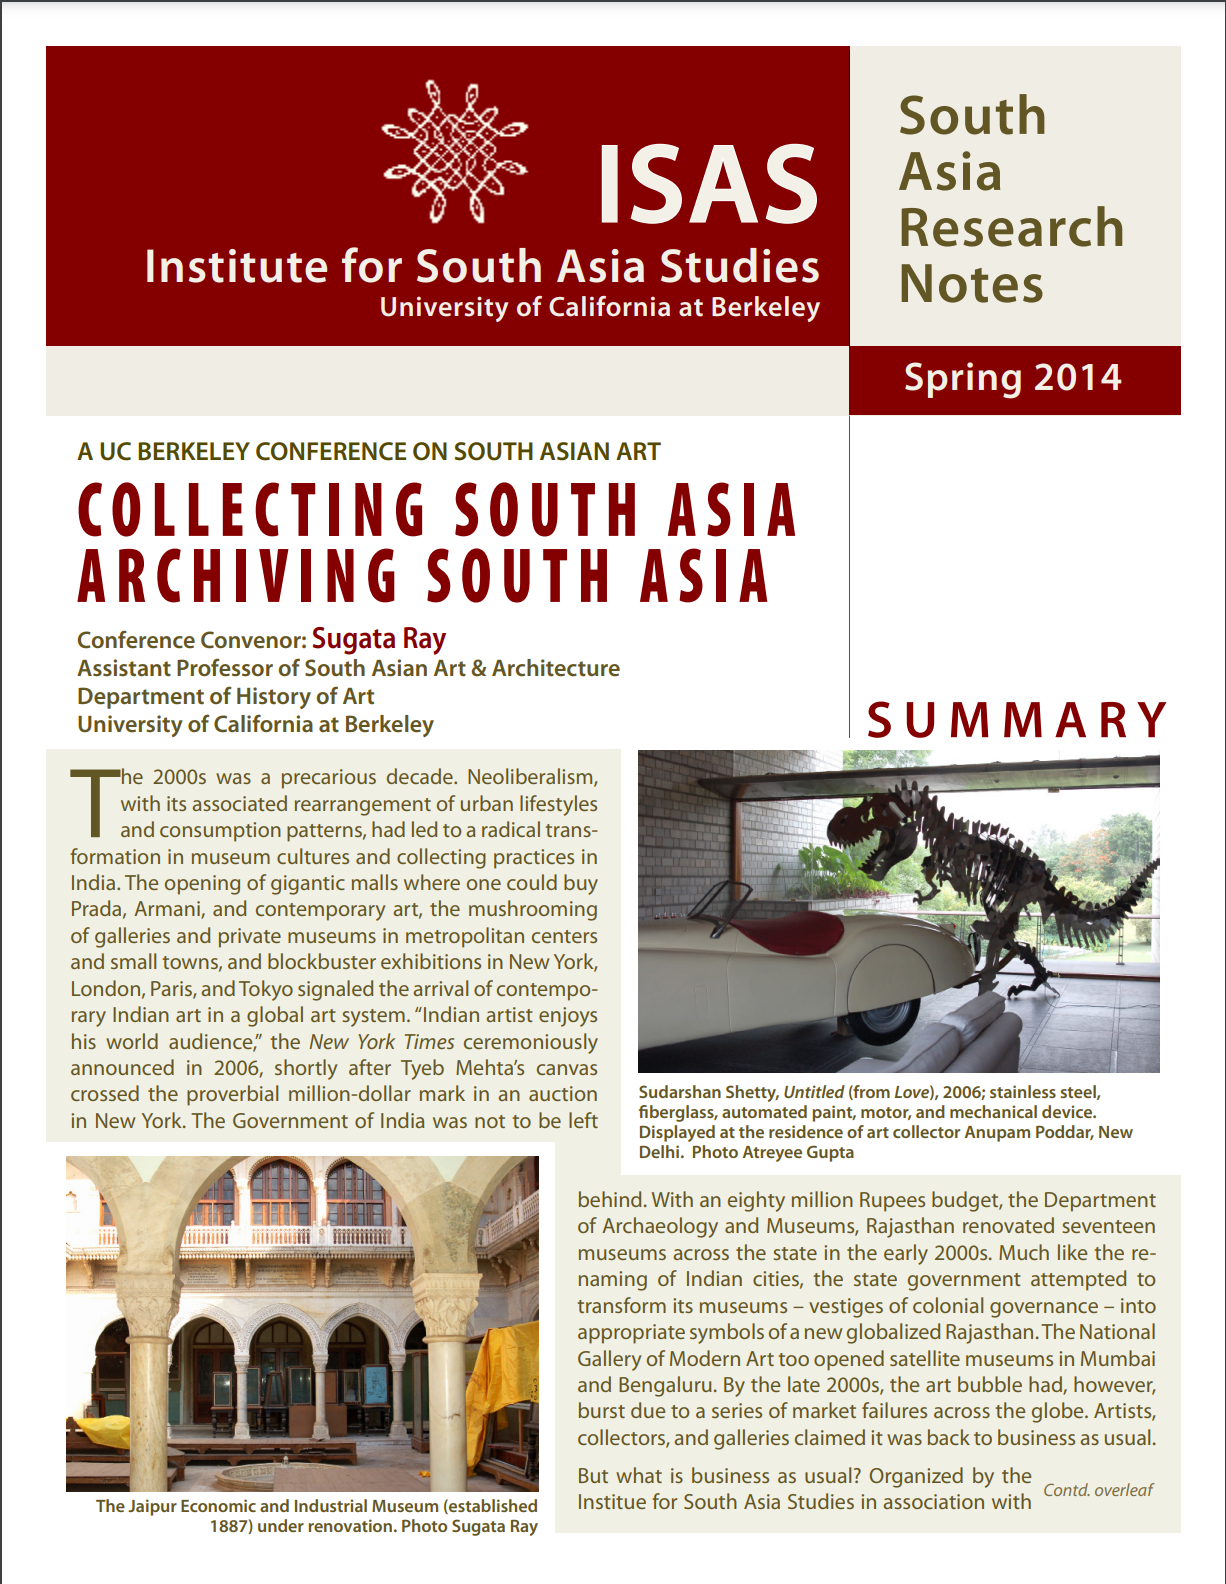 Cover image of SA Research Notes, Spring 2014